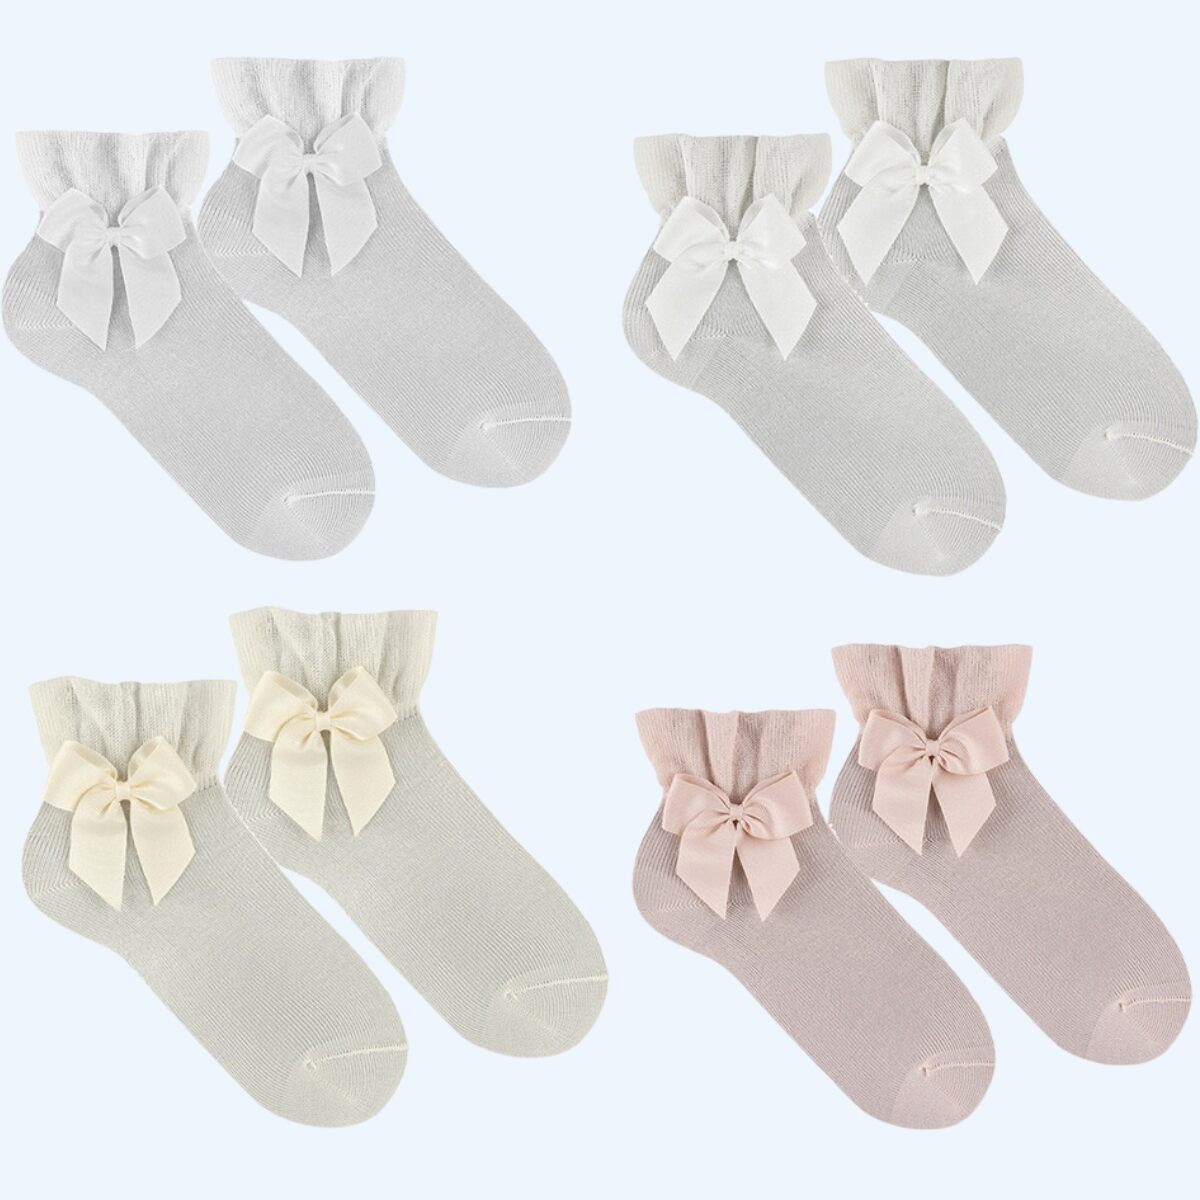 CEREMONY ANKLE SOCKSWITH GROSSGRAIN BOW CONDOR - 1